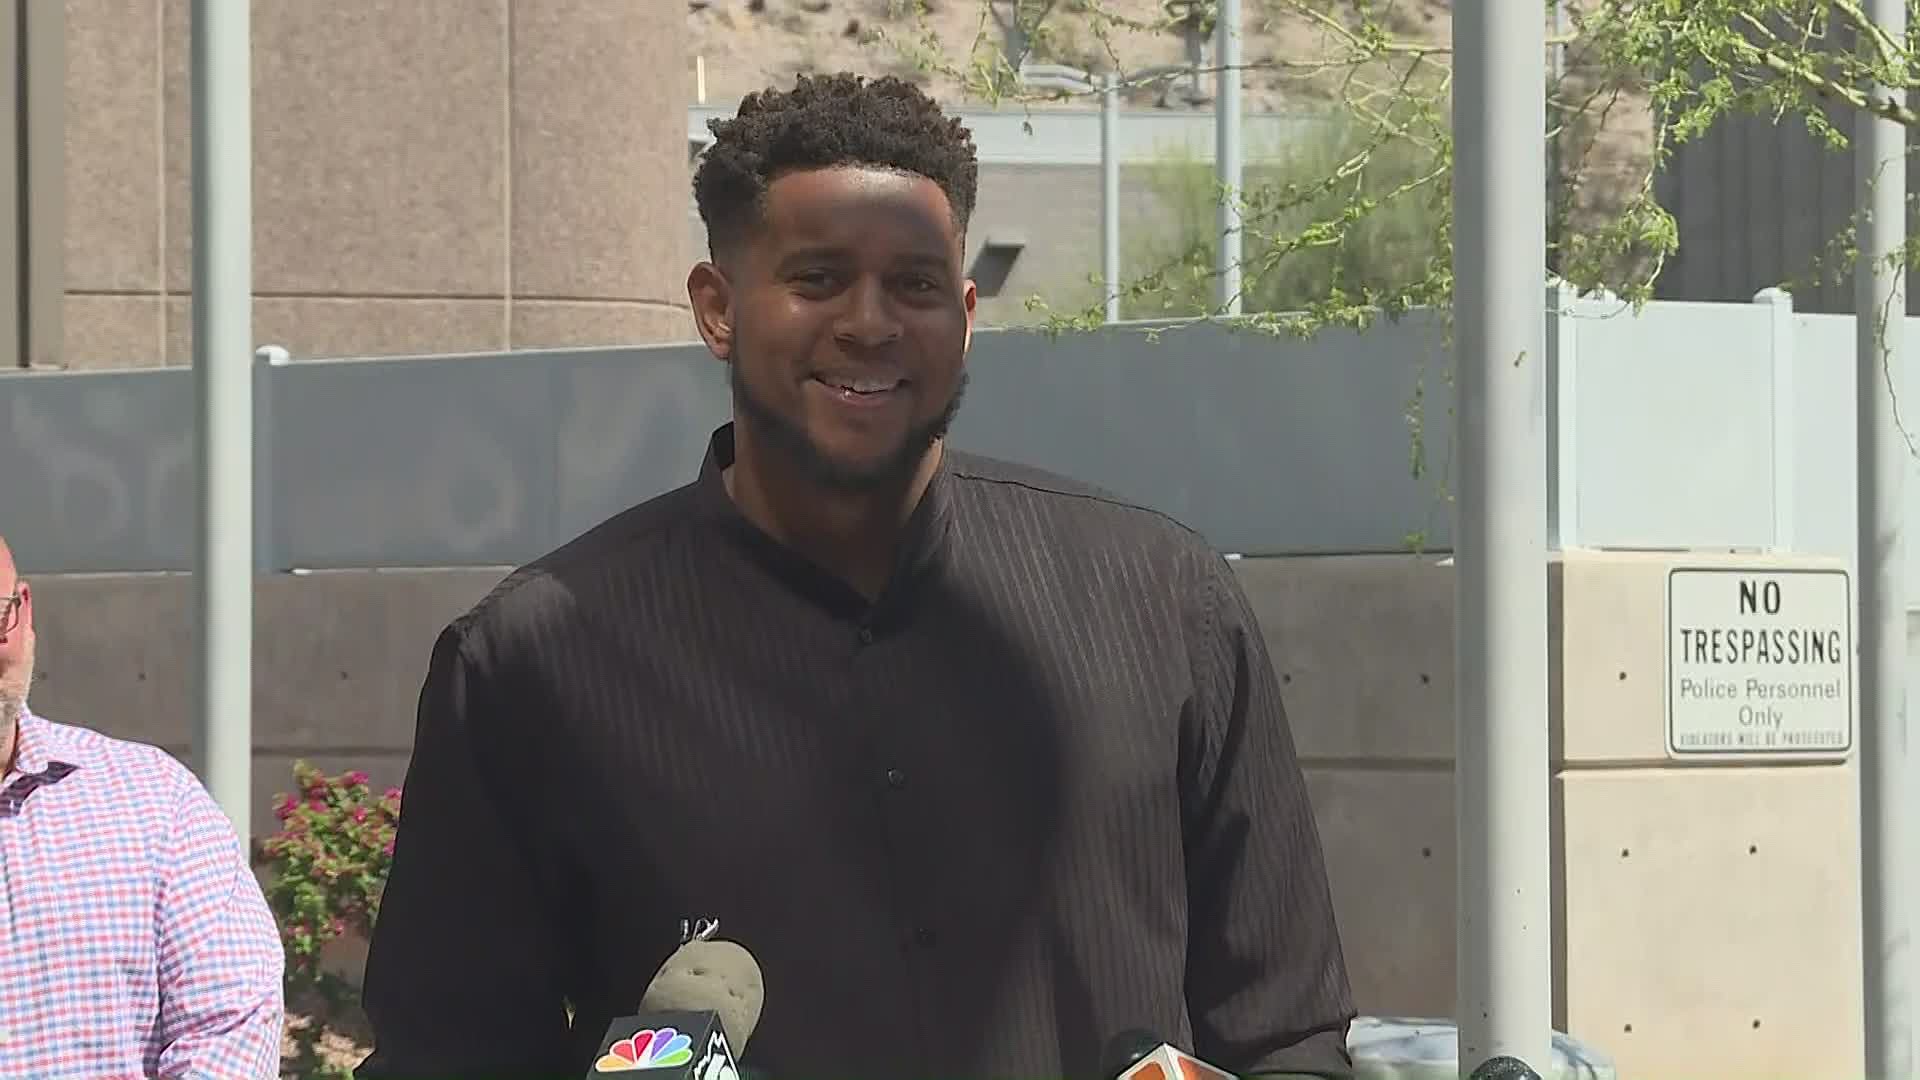 Justin Herron talks about saving a 71-year-old woman from an assault at Kiwanis Park in Tempe. Herron was drafted by the New England Patriots in the 2020 NFL Draft.